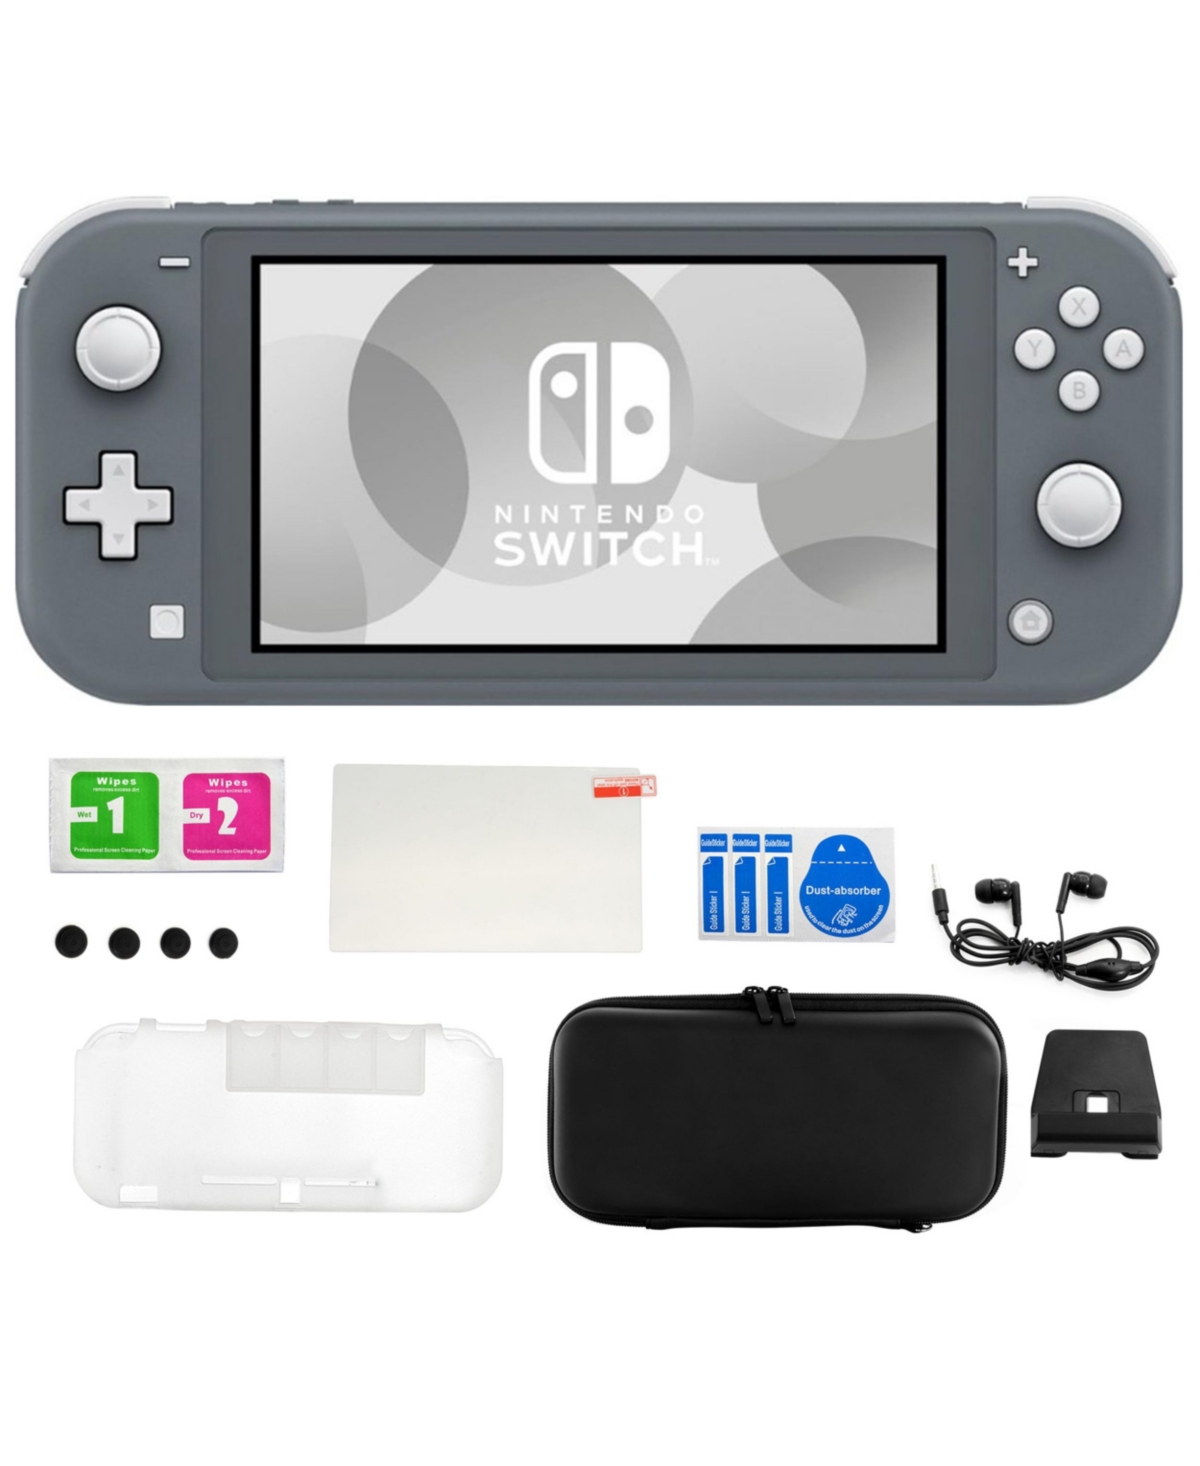 UPC 672975382322 product image for Nintendo Switch Lite in Gray with Accessory Kit | upcitemdb.com